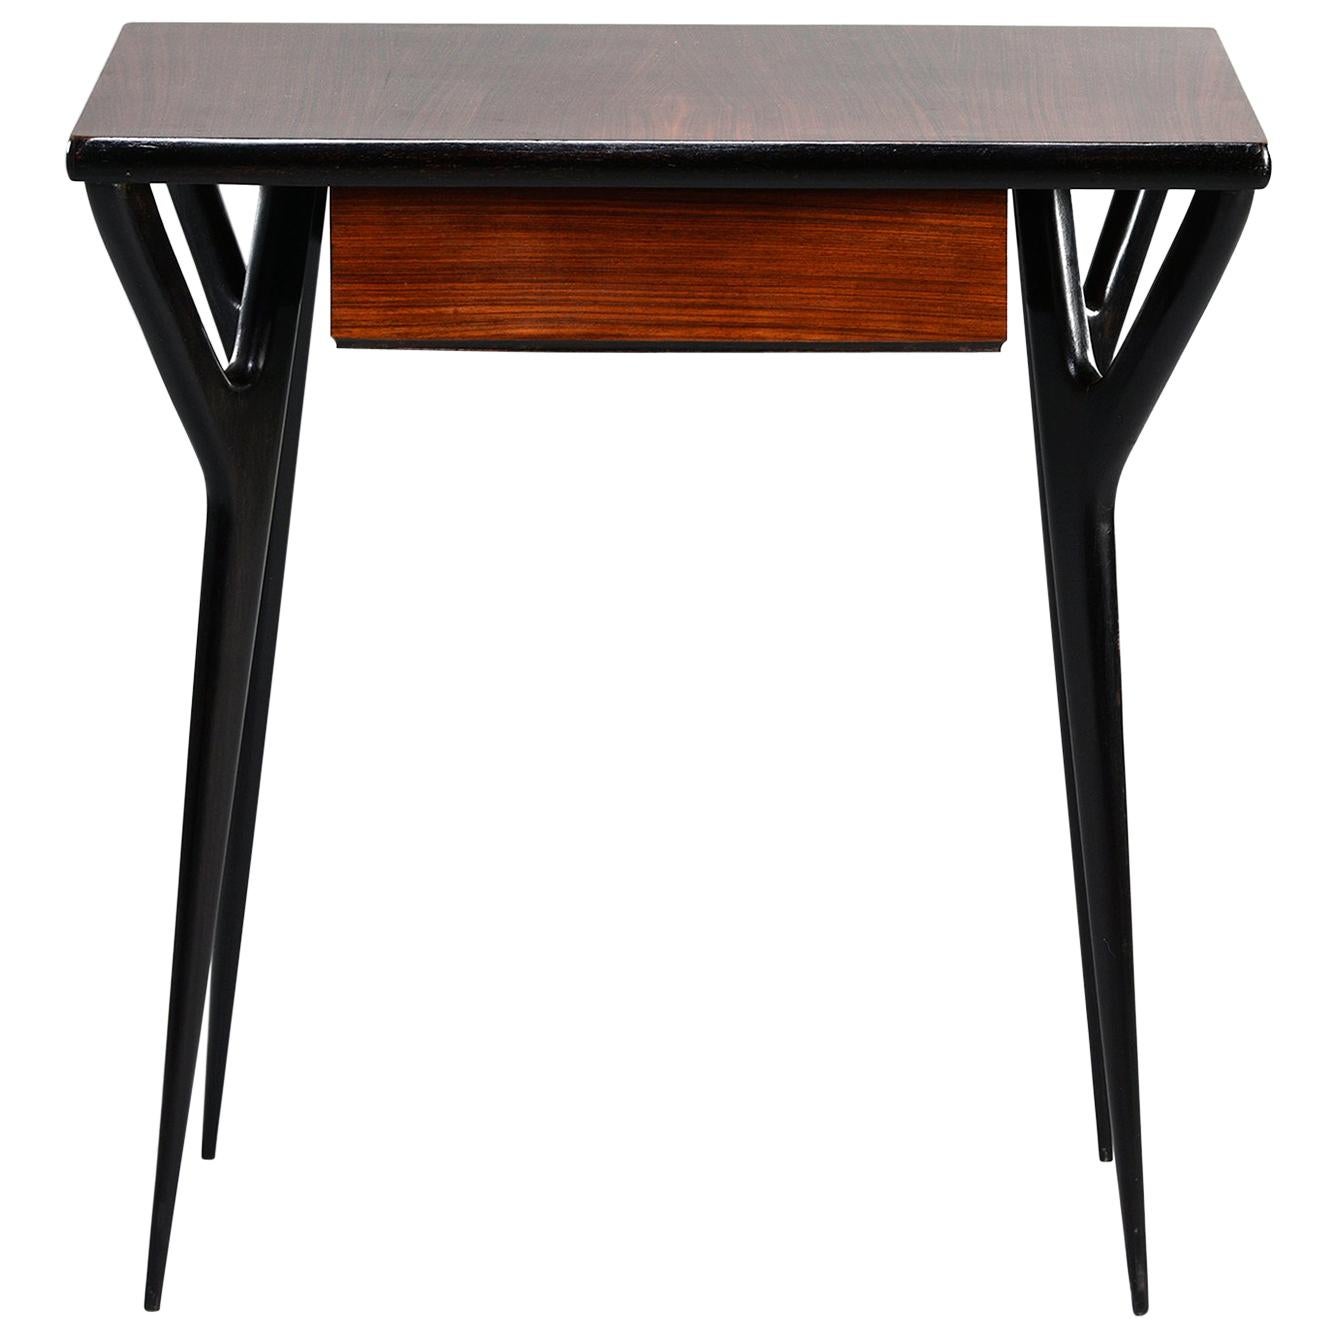 Small Midcentury Italian Desk or Writing Table